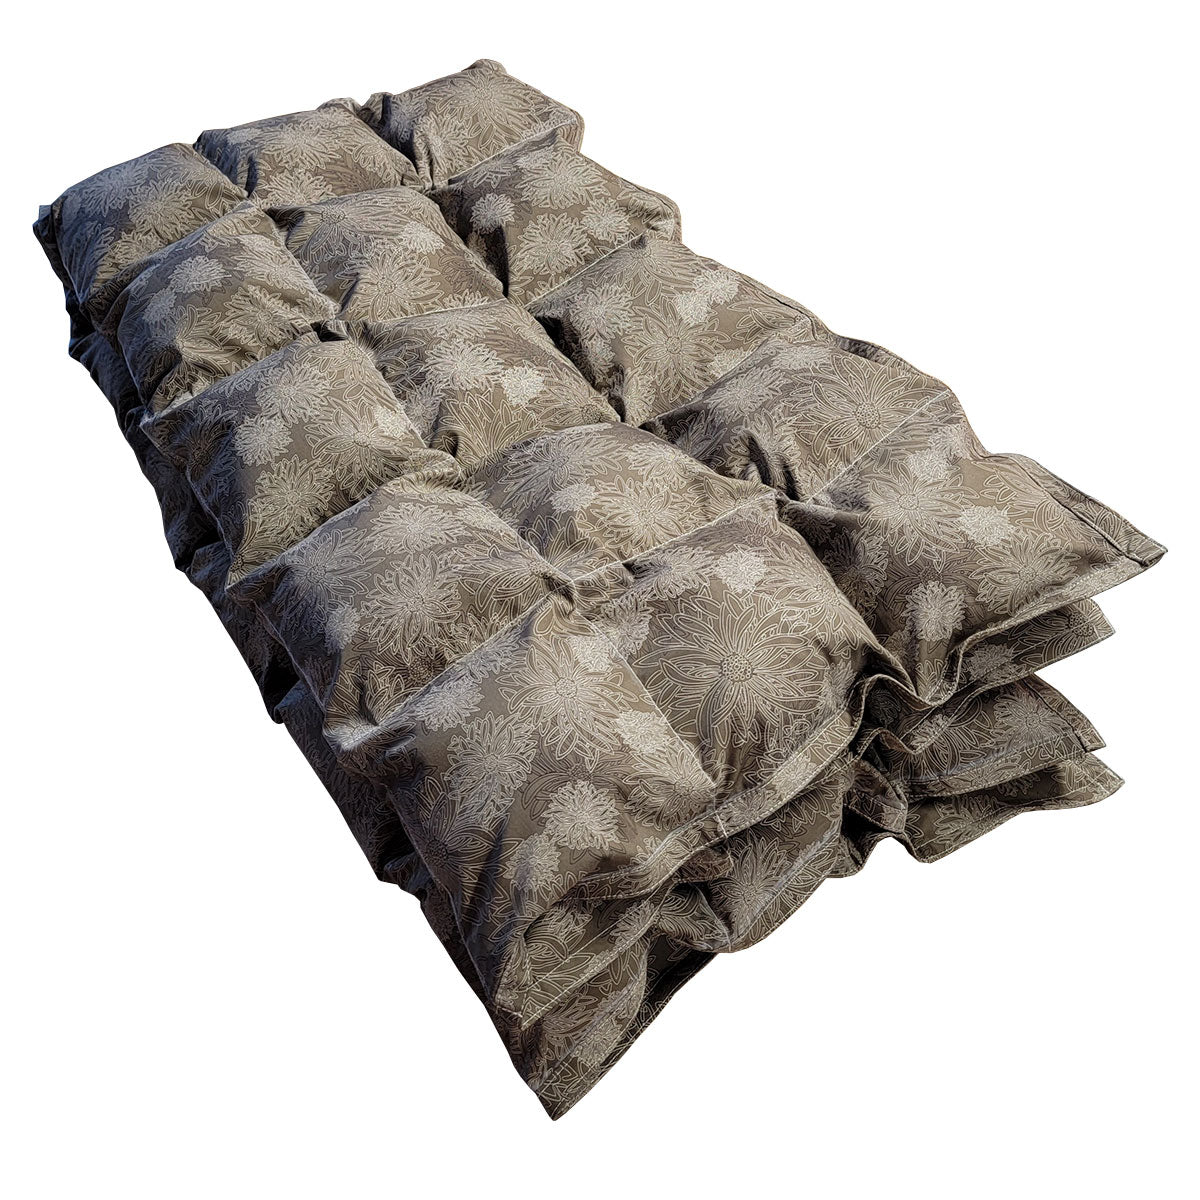 Clearance Weighted Blanket - Medium 9 lb Floral Olive (for 70 lb user)